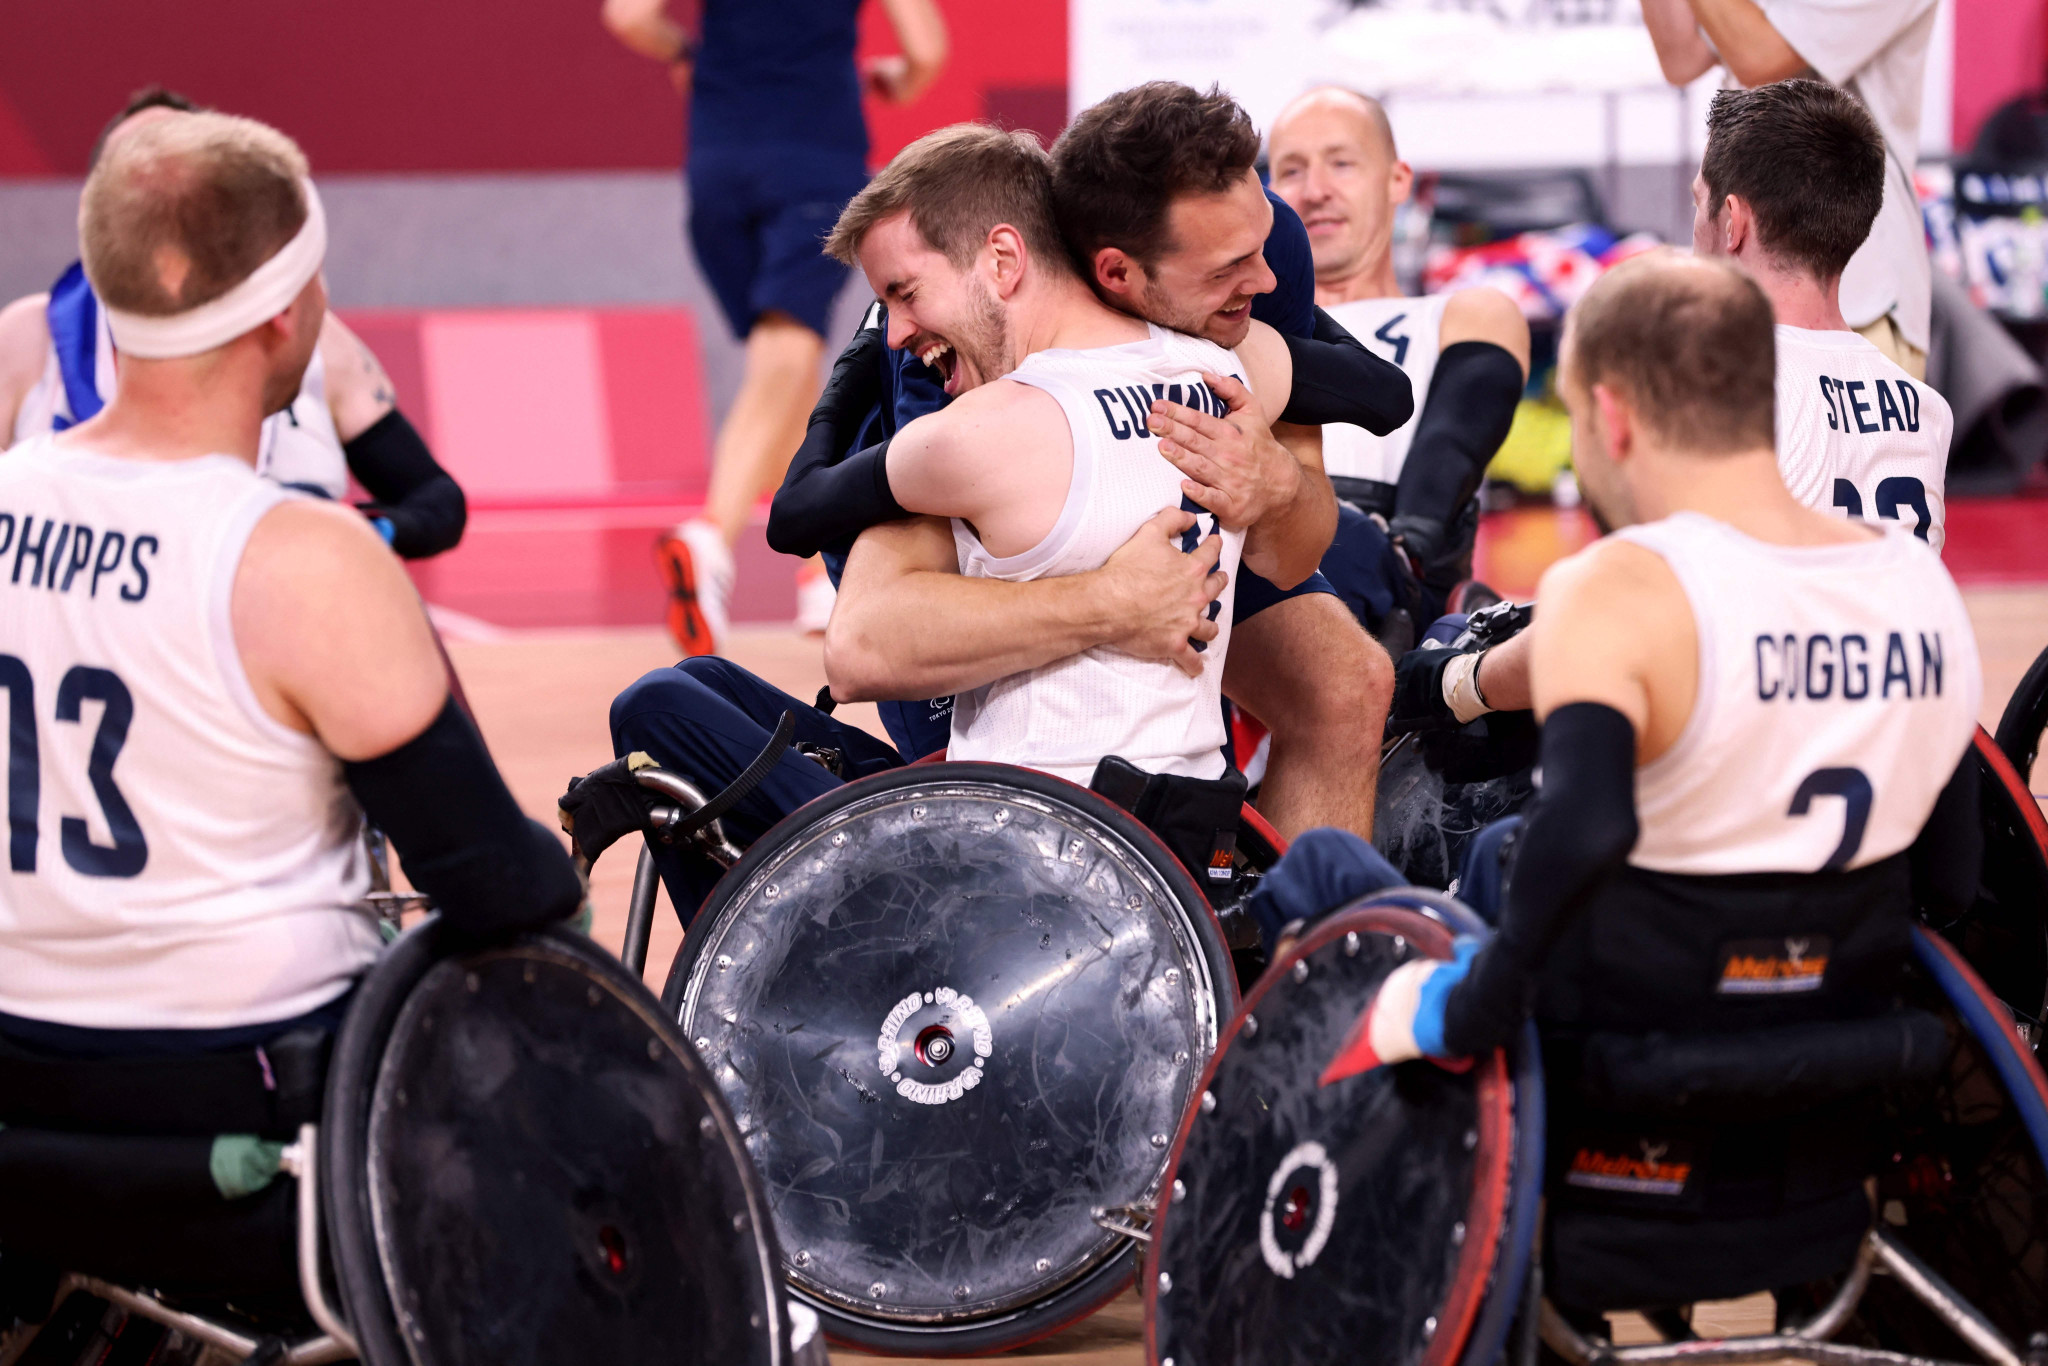 GBWR chief executive says Cardiff hosting Quad Nations tournament "hugely exciting"